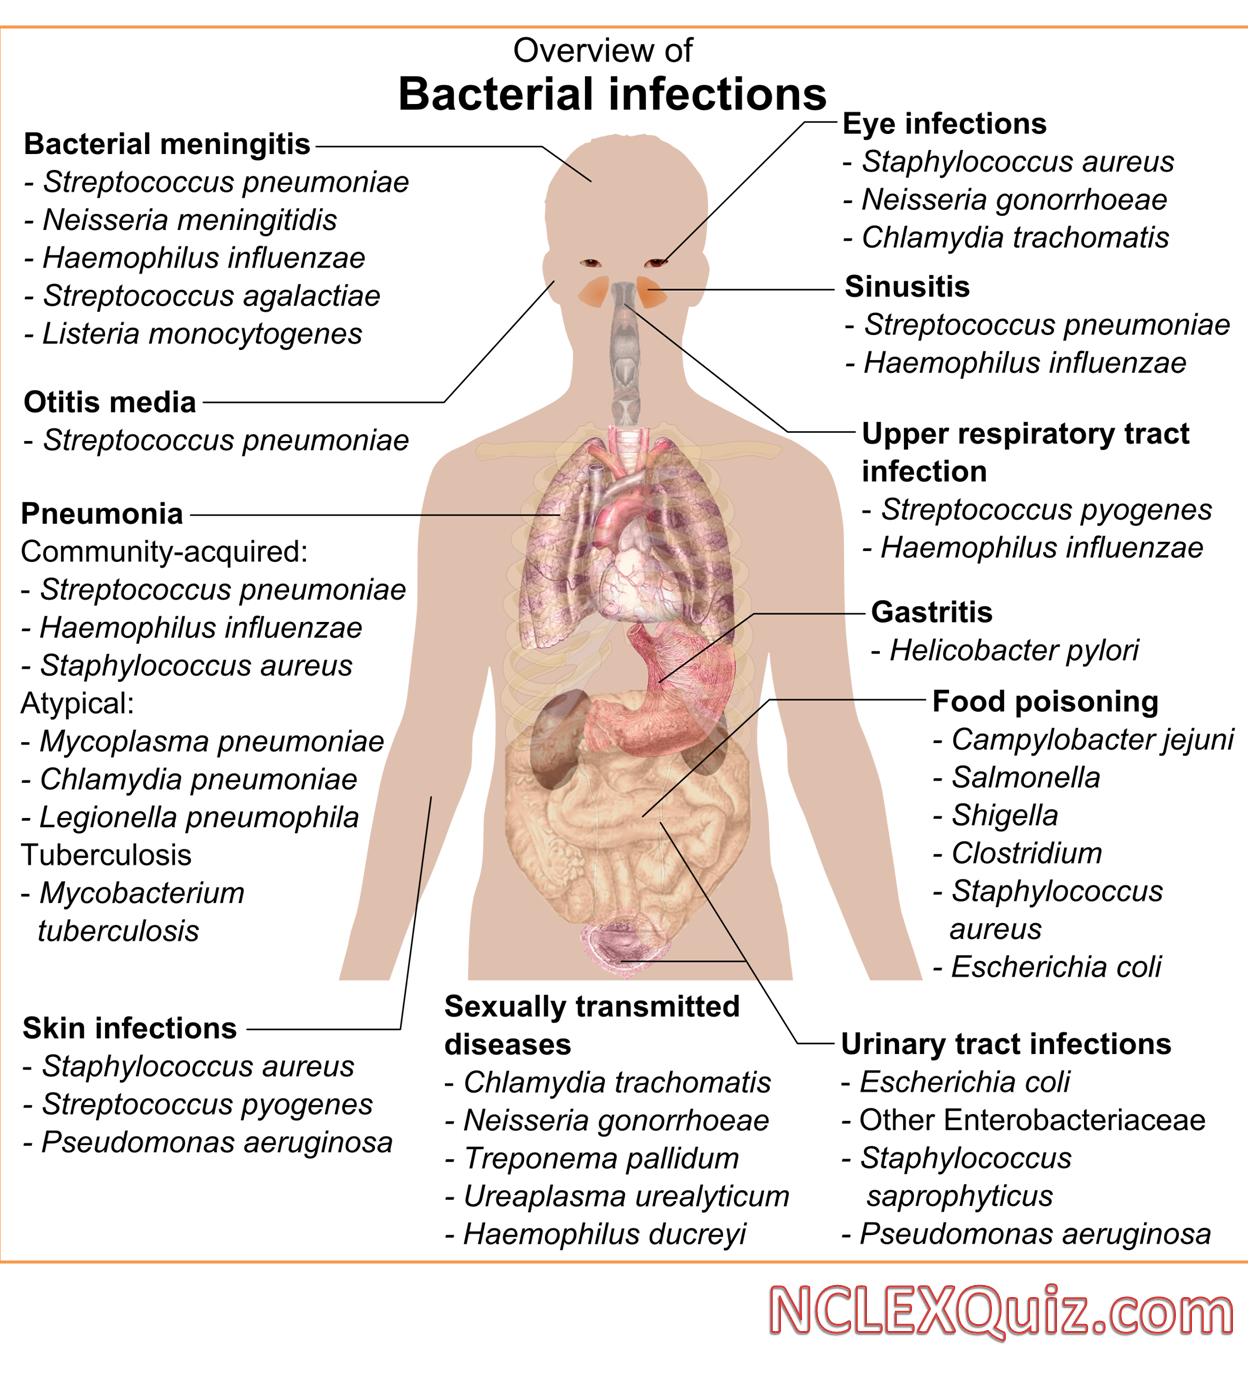 Overview of the Bacterial Infections Chart